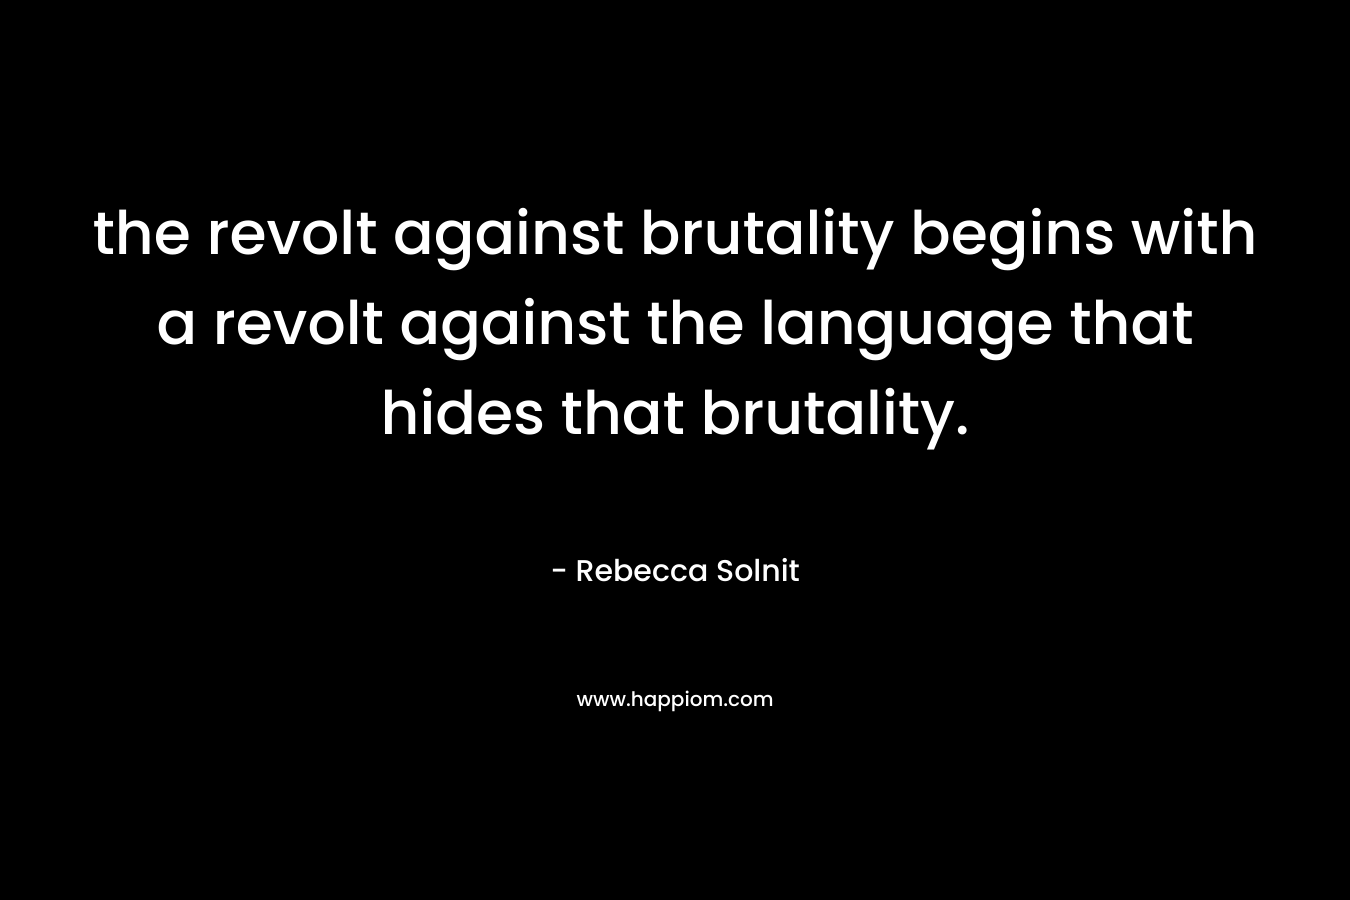 the revolt against brutality begins with a revolt against the language that hides that brutality.